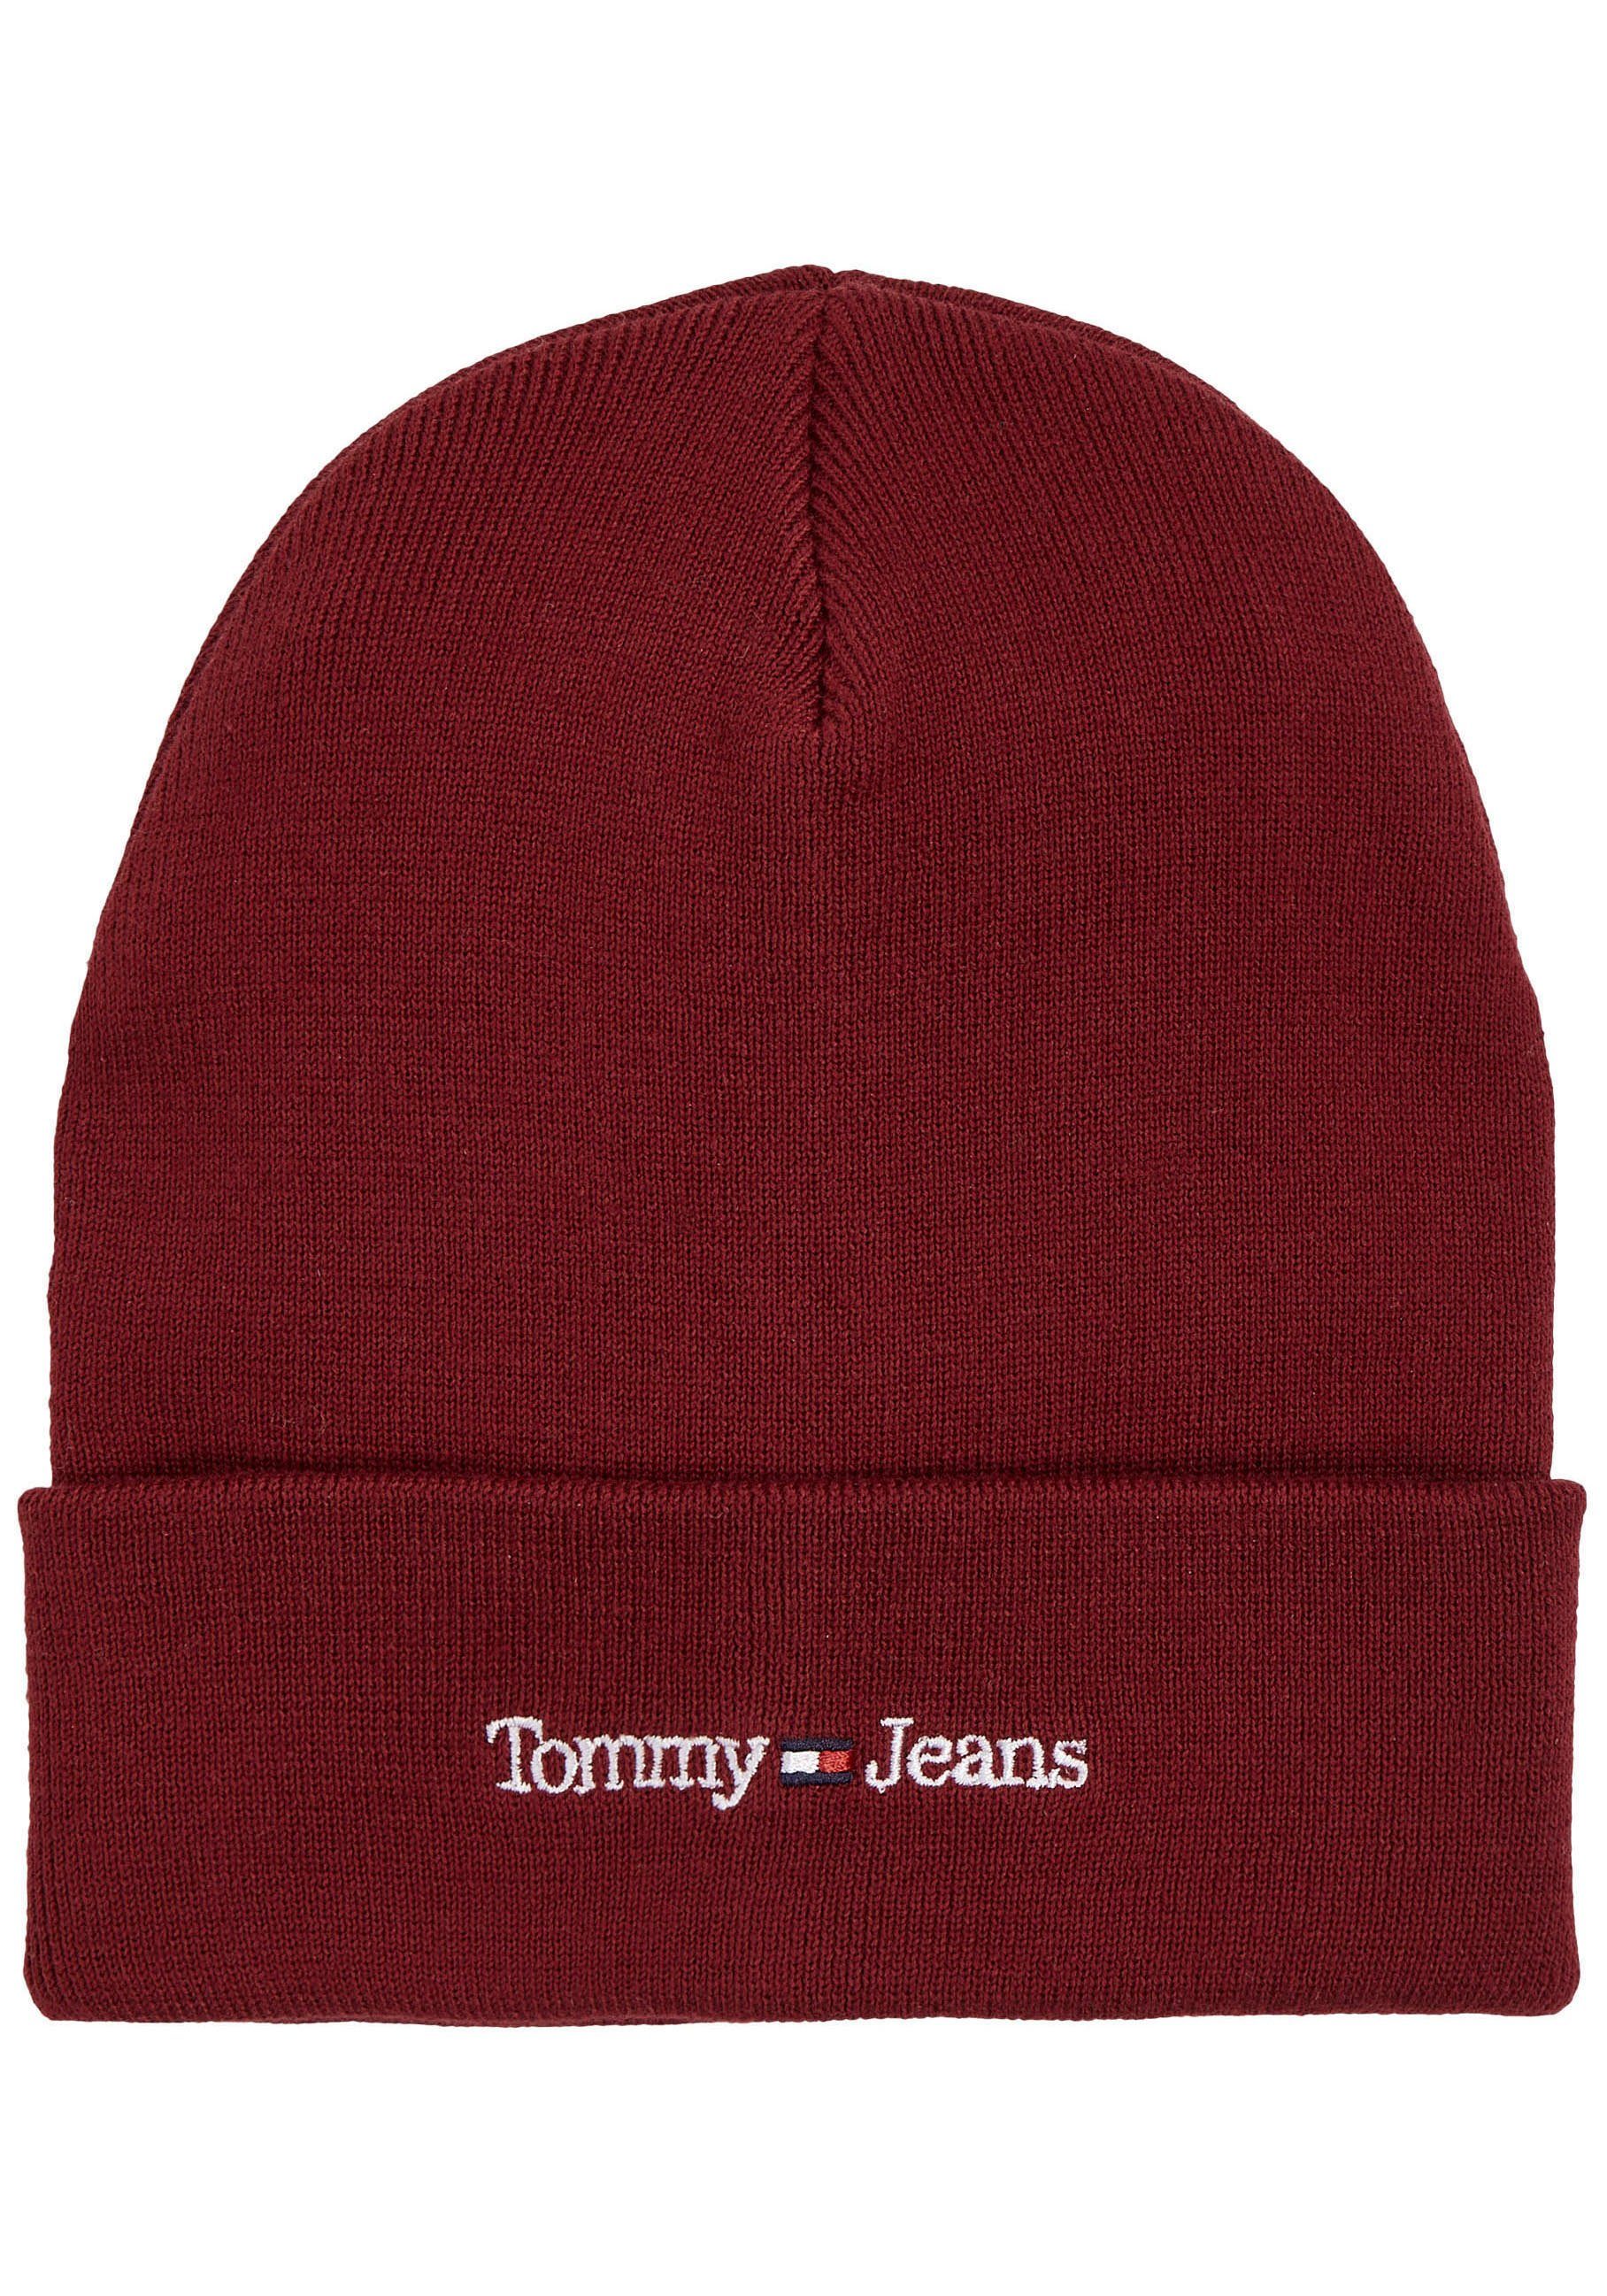 Tommy Jeans Beanie TJM SPORT Rouge BEANIE